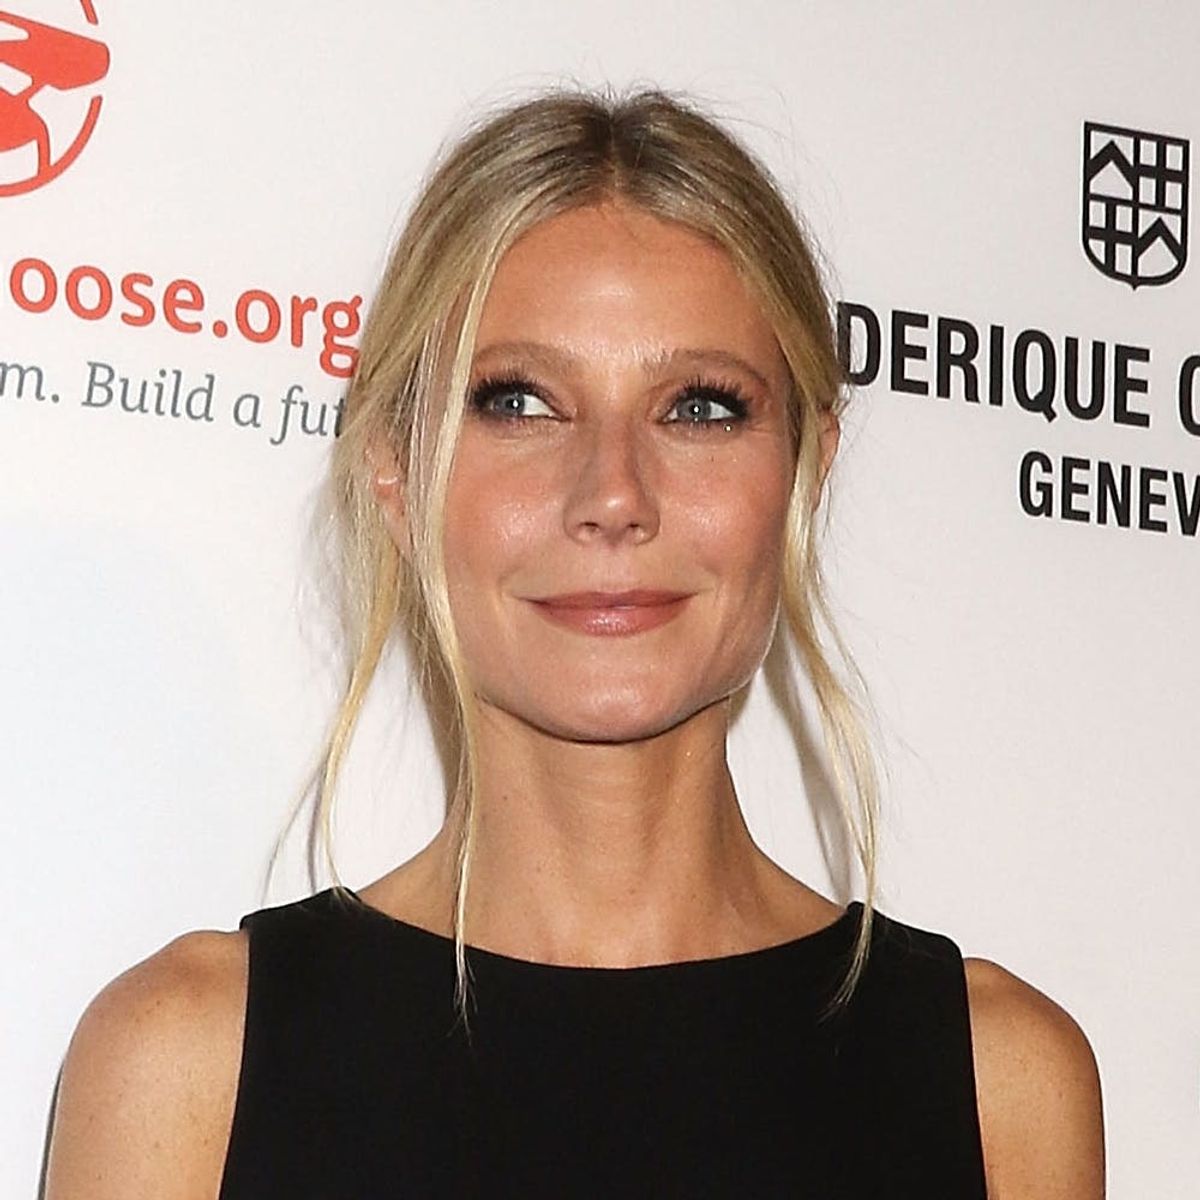 Gwyneth Paltrow Wants You to Buy a $66 Jade Egg for Your, Uh, Y’Know… and It’s Selling Out!